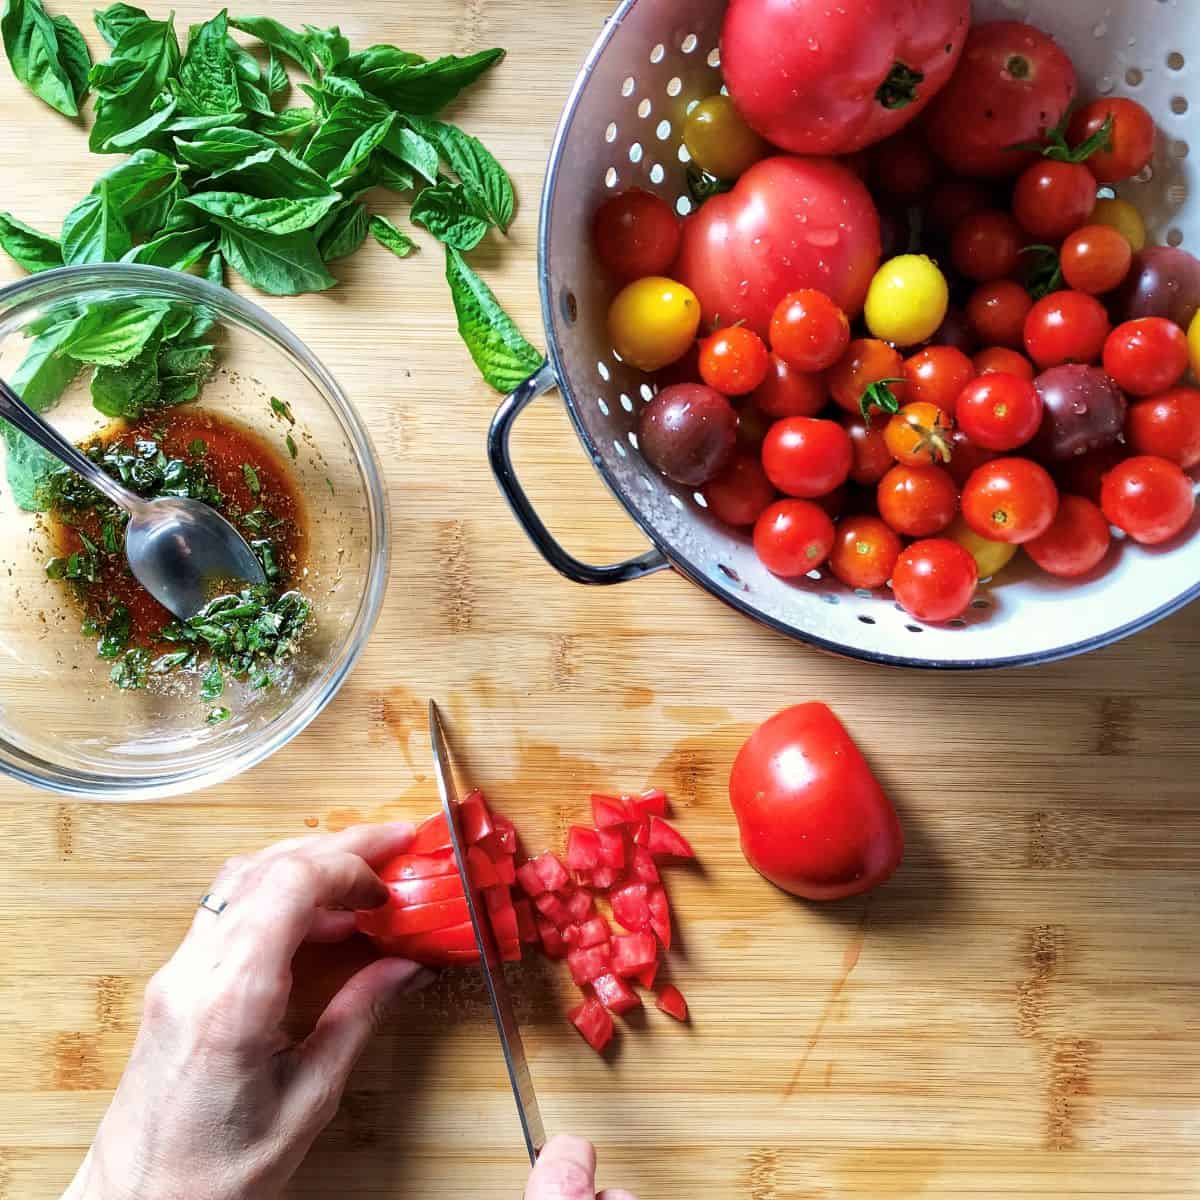 Tomatoes are being diced on a wooden board.